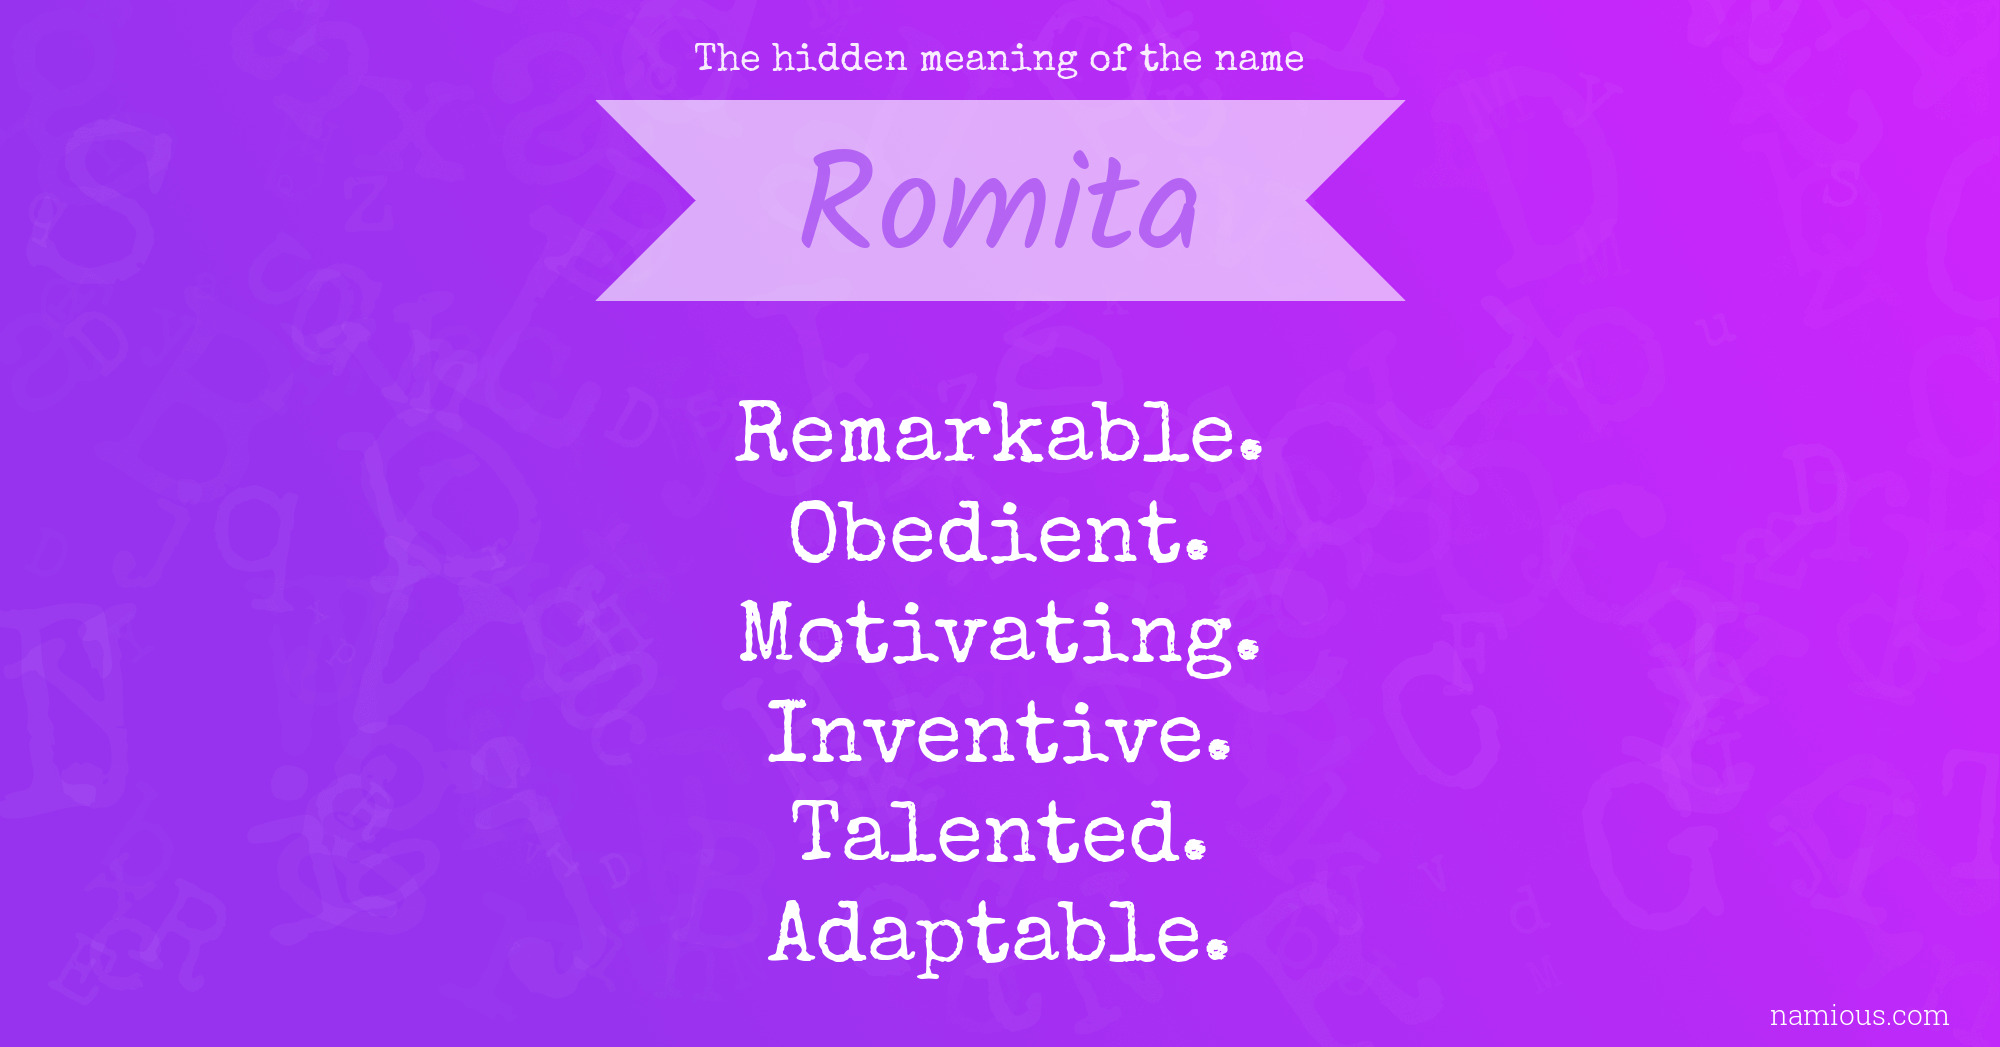 The hidden meaning of the name Romita